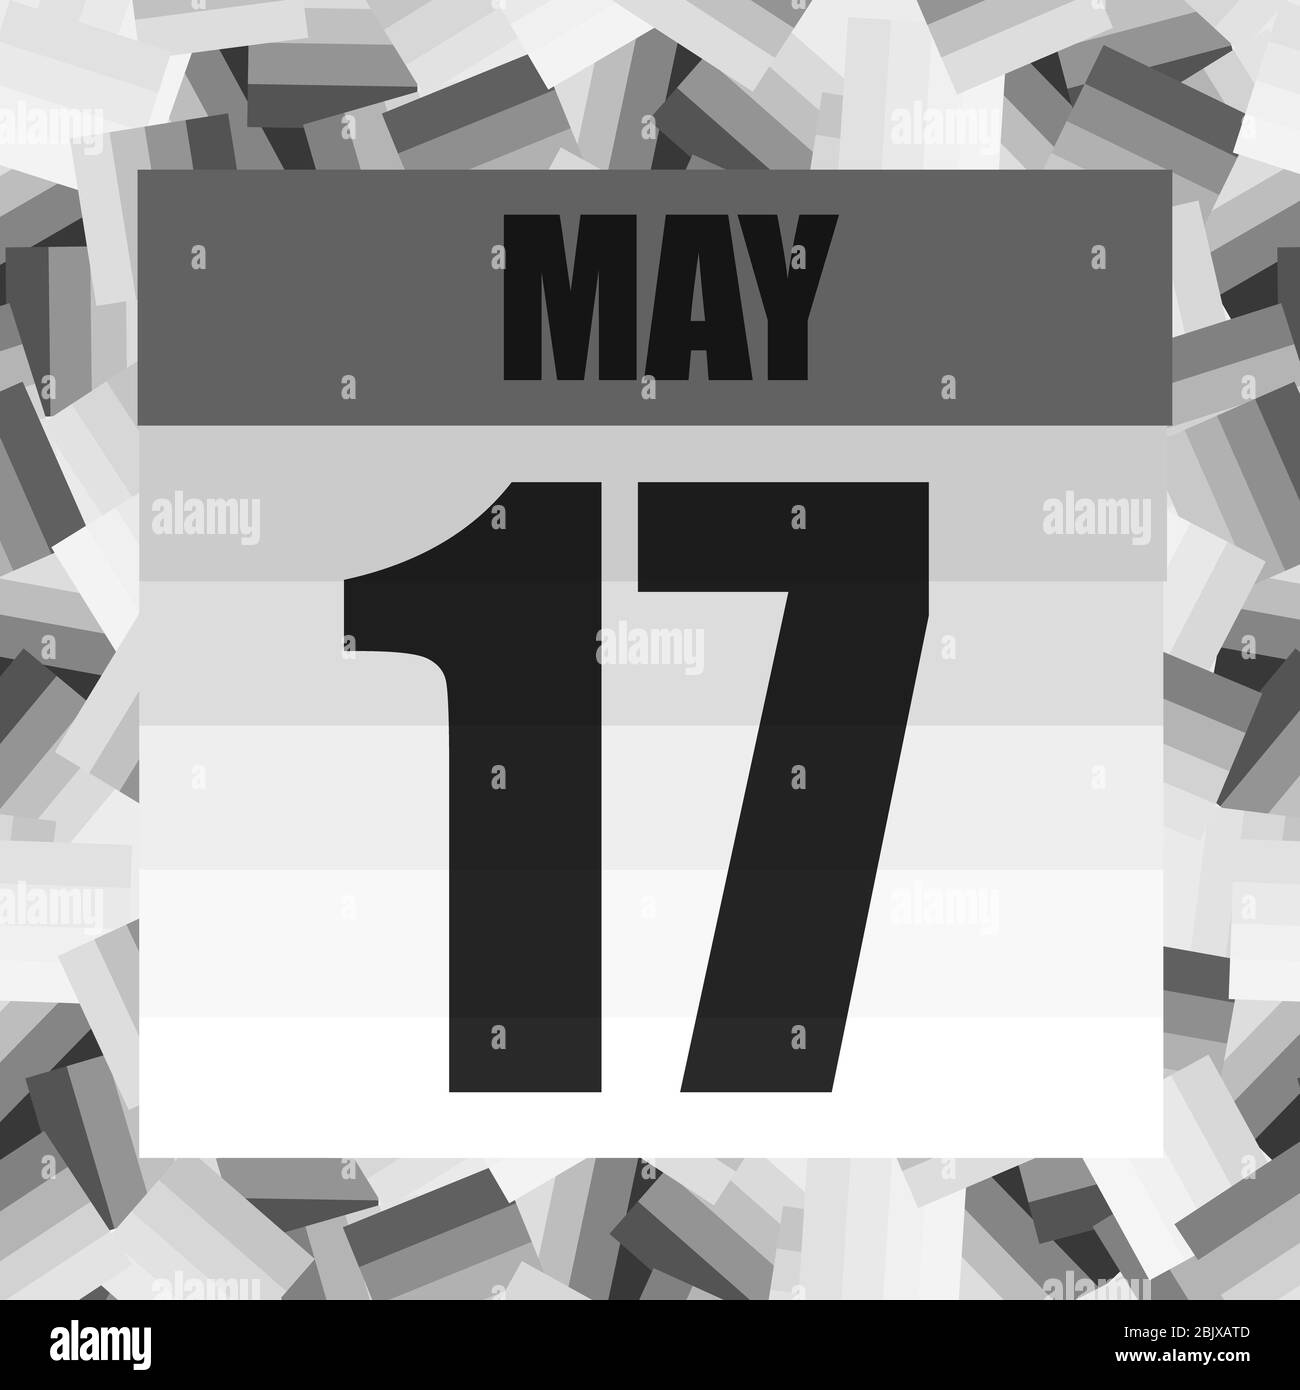 May 17 icon. For planning important day. Banner for holidays and special days. Seventeenth of may. Illustration. Stock Photo